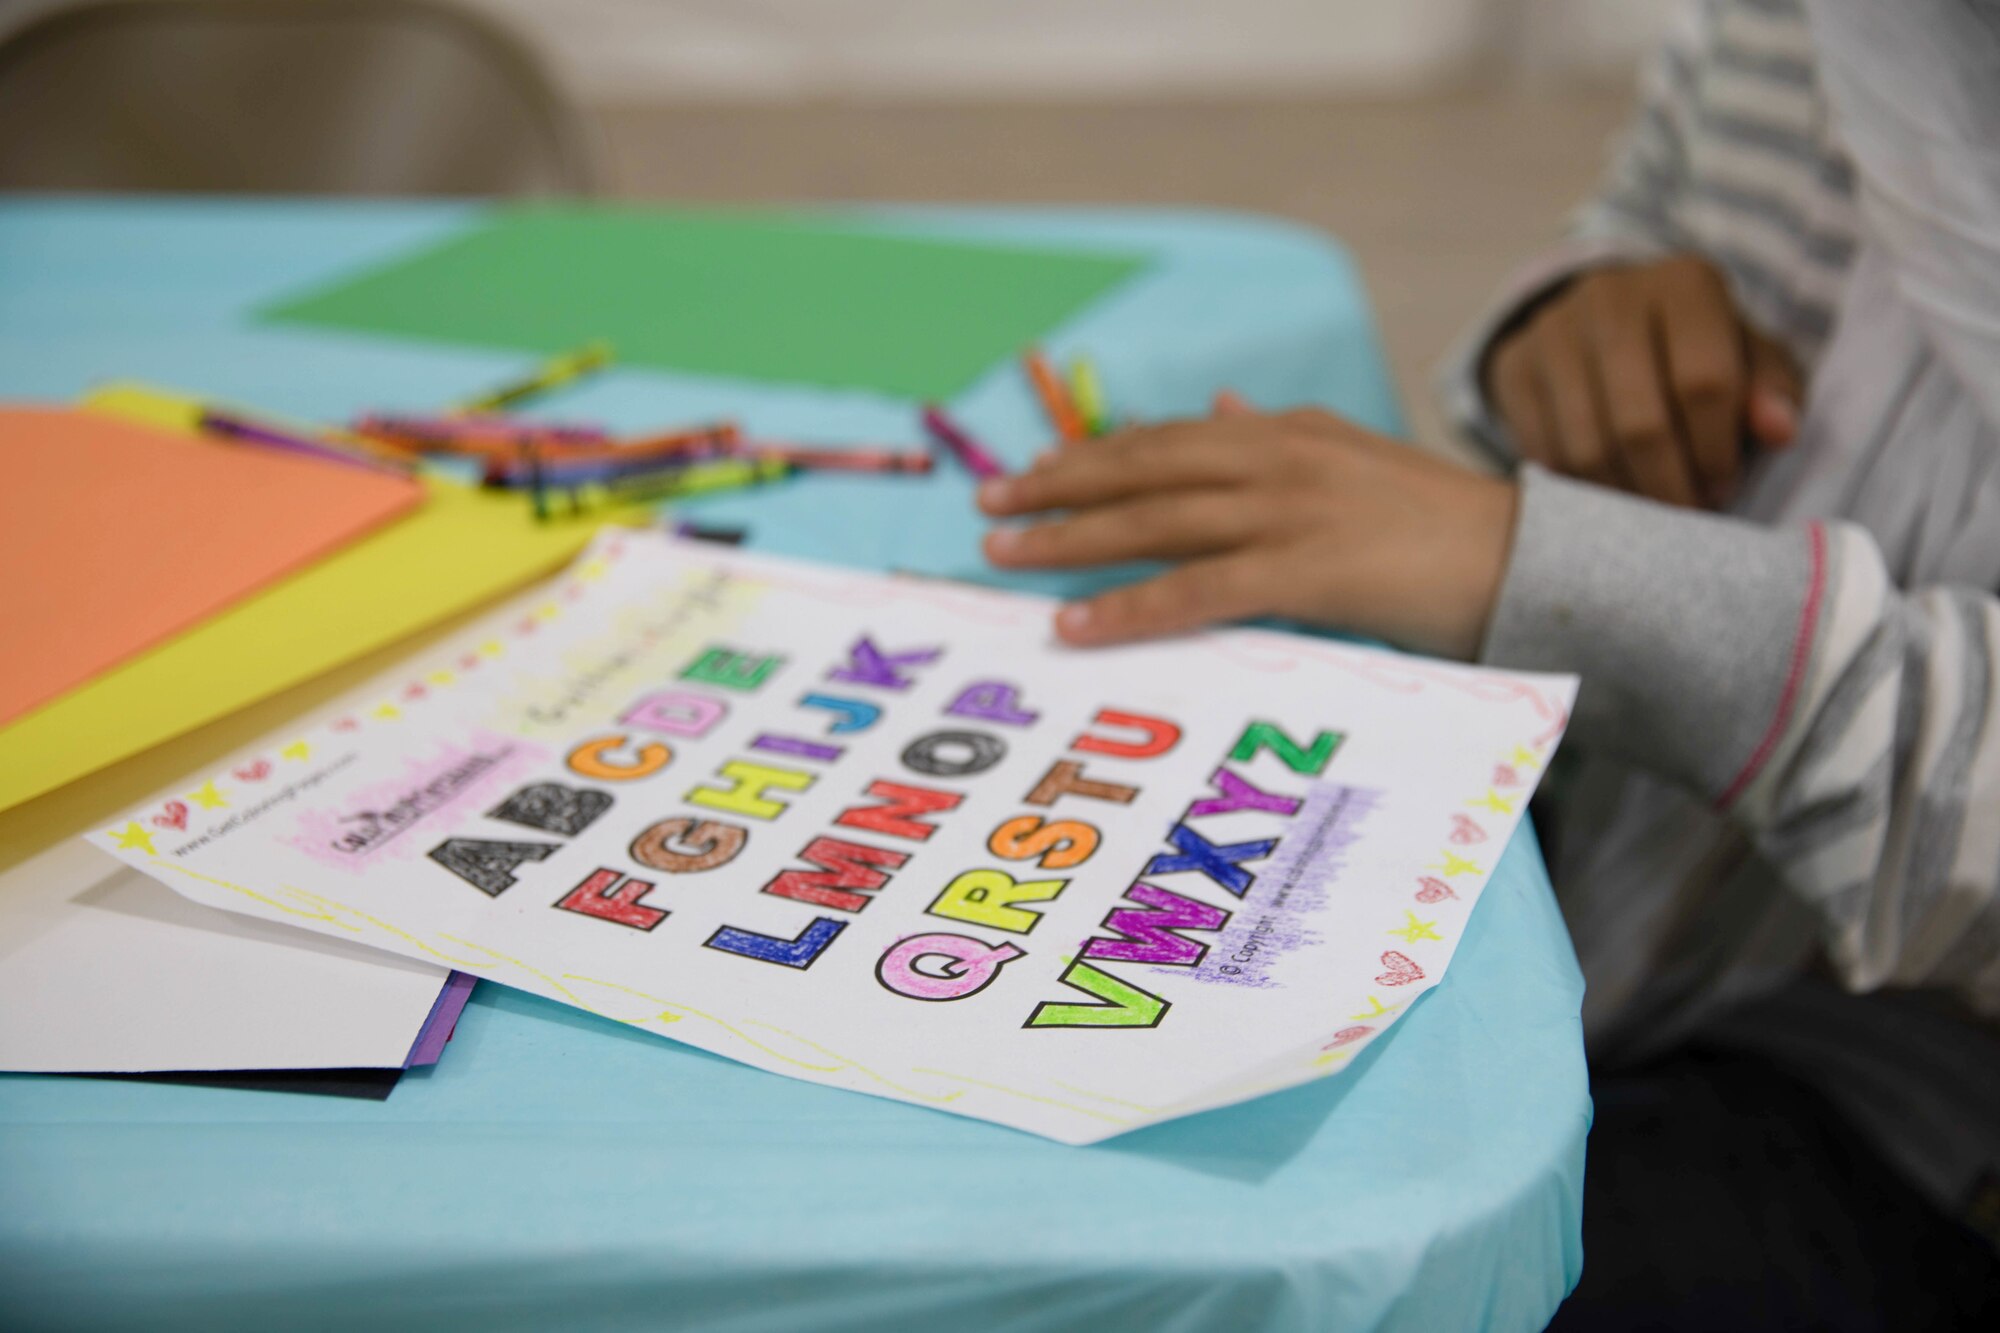 An Afghan child colors in the letters of the English alphabet during the opening of a new education center at Aman Omid Village on Holloman Air Force Base, New Mexico, Oct. 19, 2021. The Department of Defense, through U.S. Northern Command, and in support of the Department of Homeland Security, is providing transportation, temporary housing, medical screening, and general support for at least 50,000 Afghan evacuees at suitable facilities, in permanent or temporary structures, as quickly as possible. This initiative provides Afghan personnel essential support at secure locations outside Afghanistan. (U.S. Army Photo By Pfc. Anthony Ford)